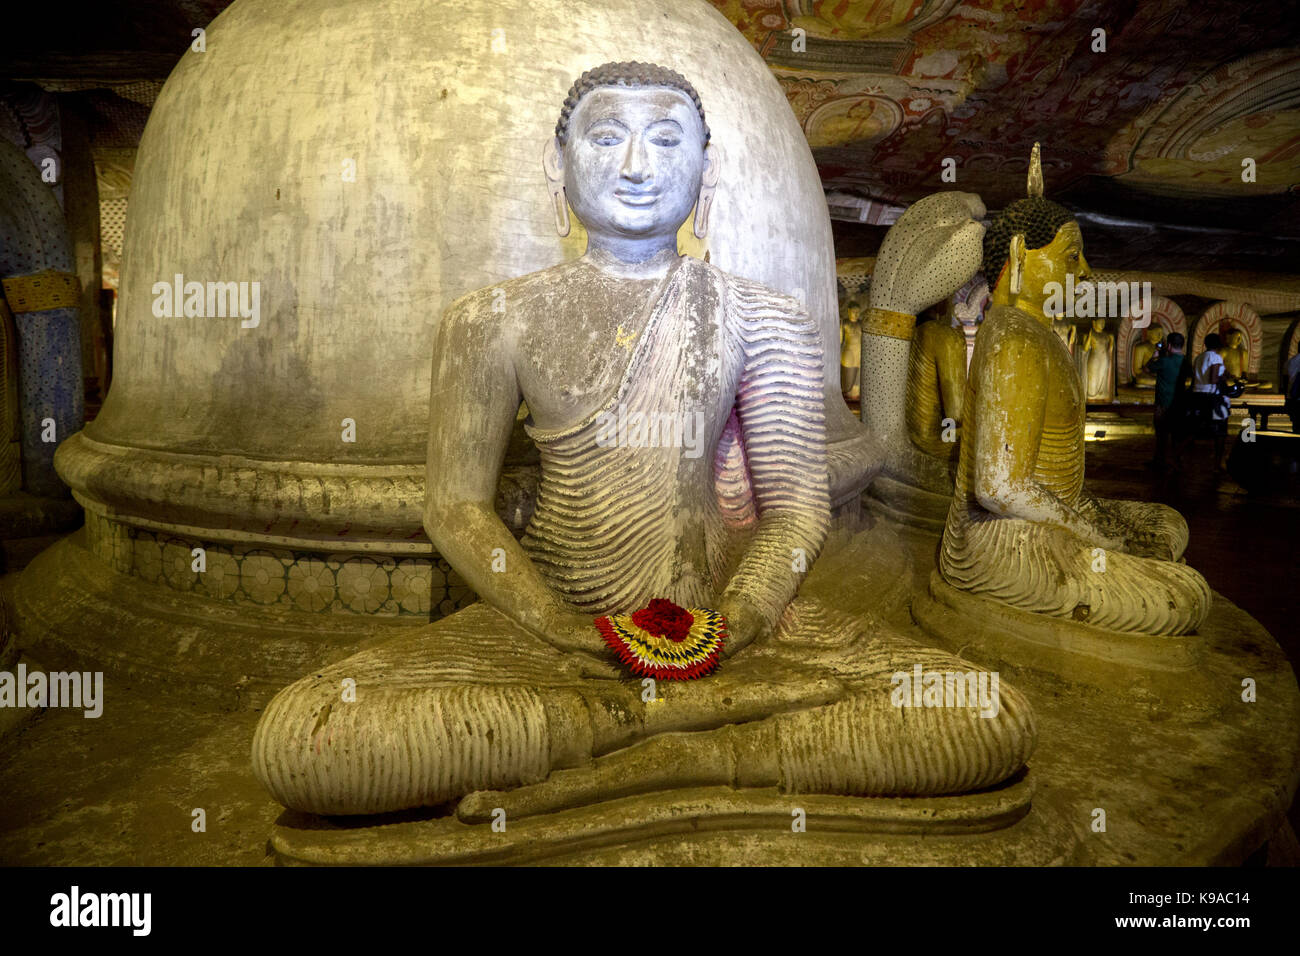 Dambulla Sri Lanka Dambulla Cave Temples - Cave II  Maharaja Viharaya Statue Of Seated Buddha Showing Dhyana Mudra Gesture Of Meditation With Flower Offering In Hands In Front Of Dagoba Stock Photo